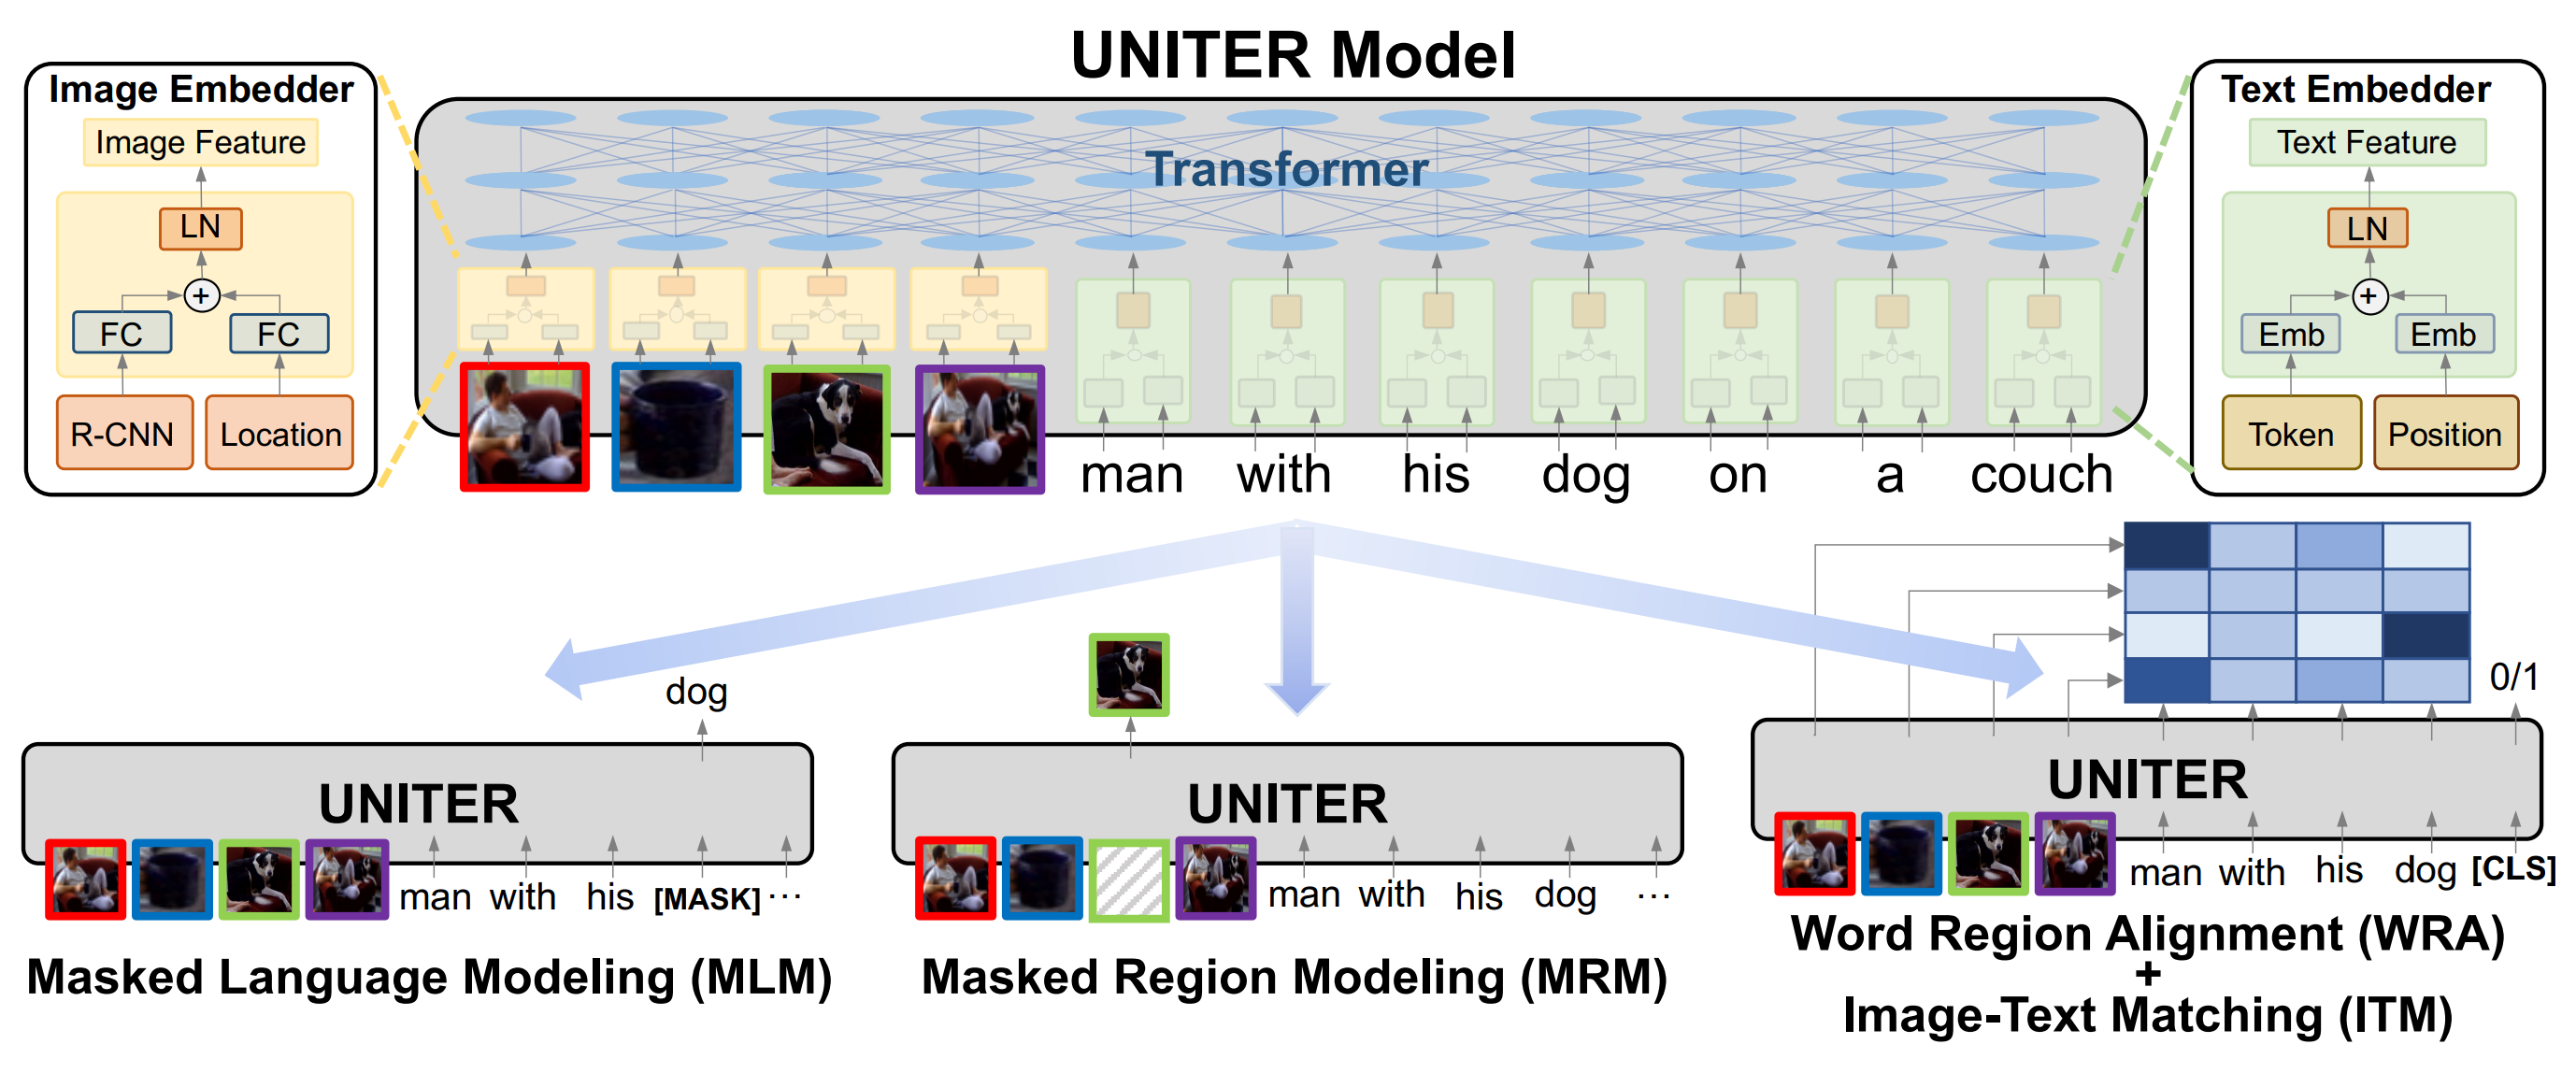 Overview of UNITER